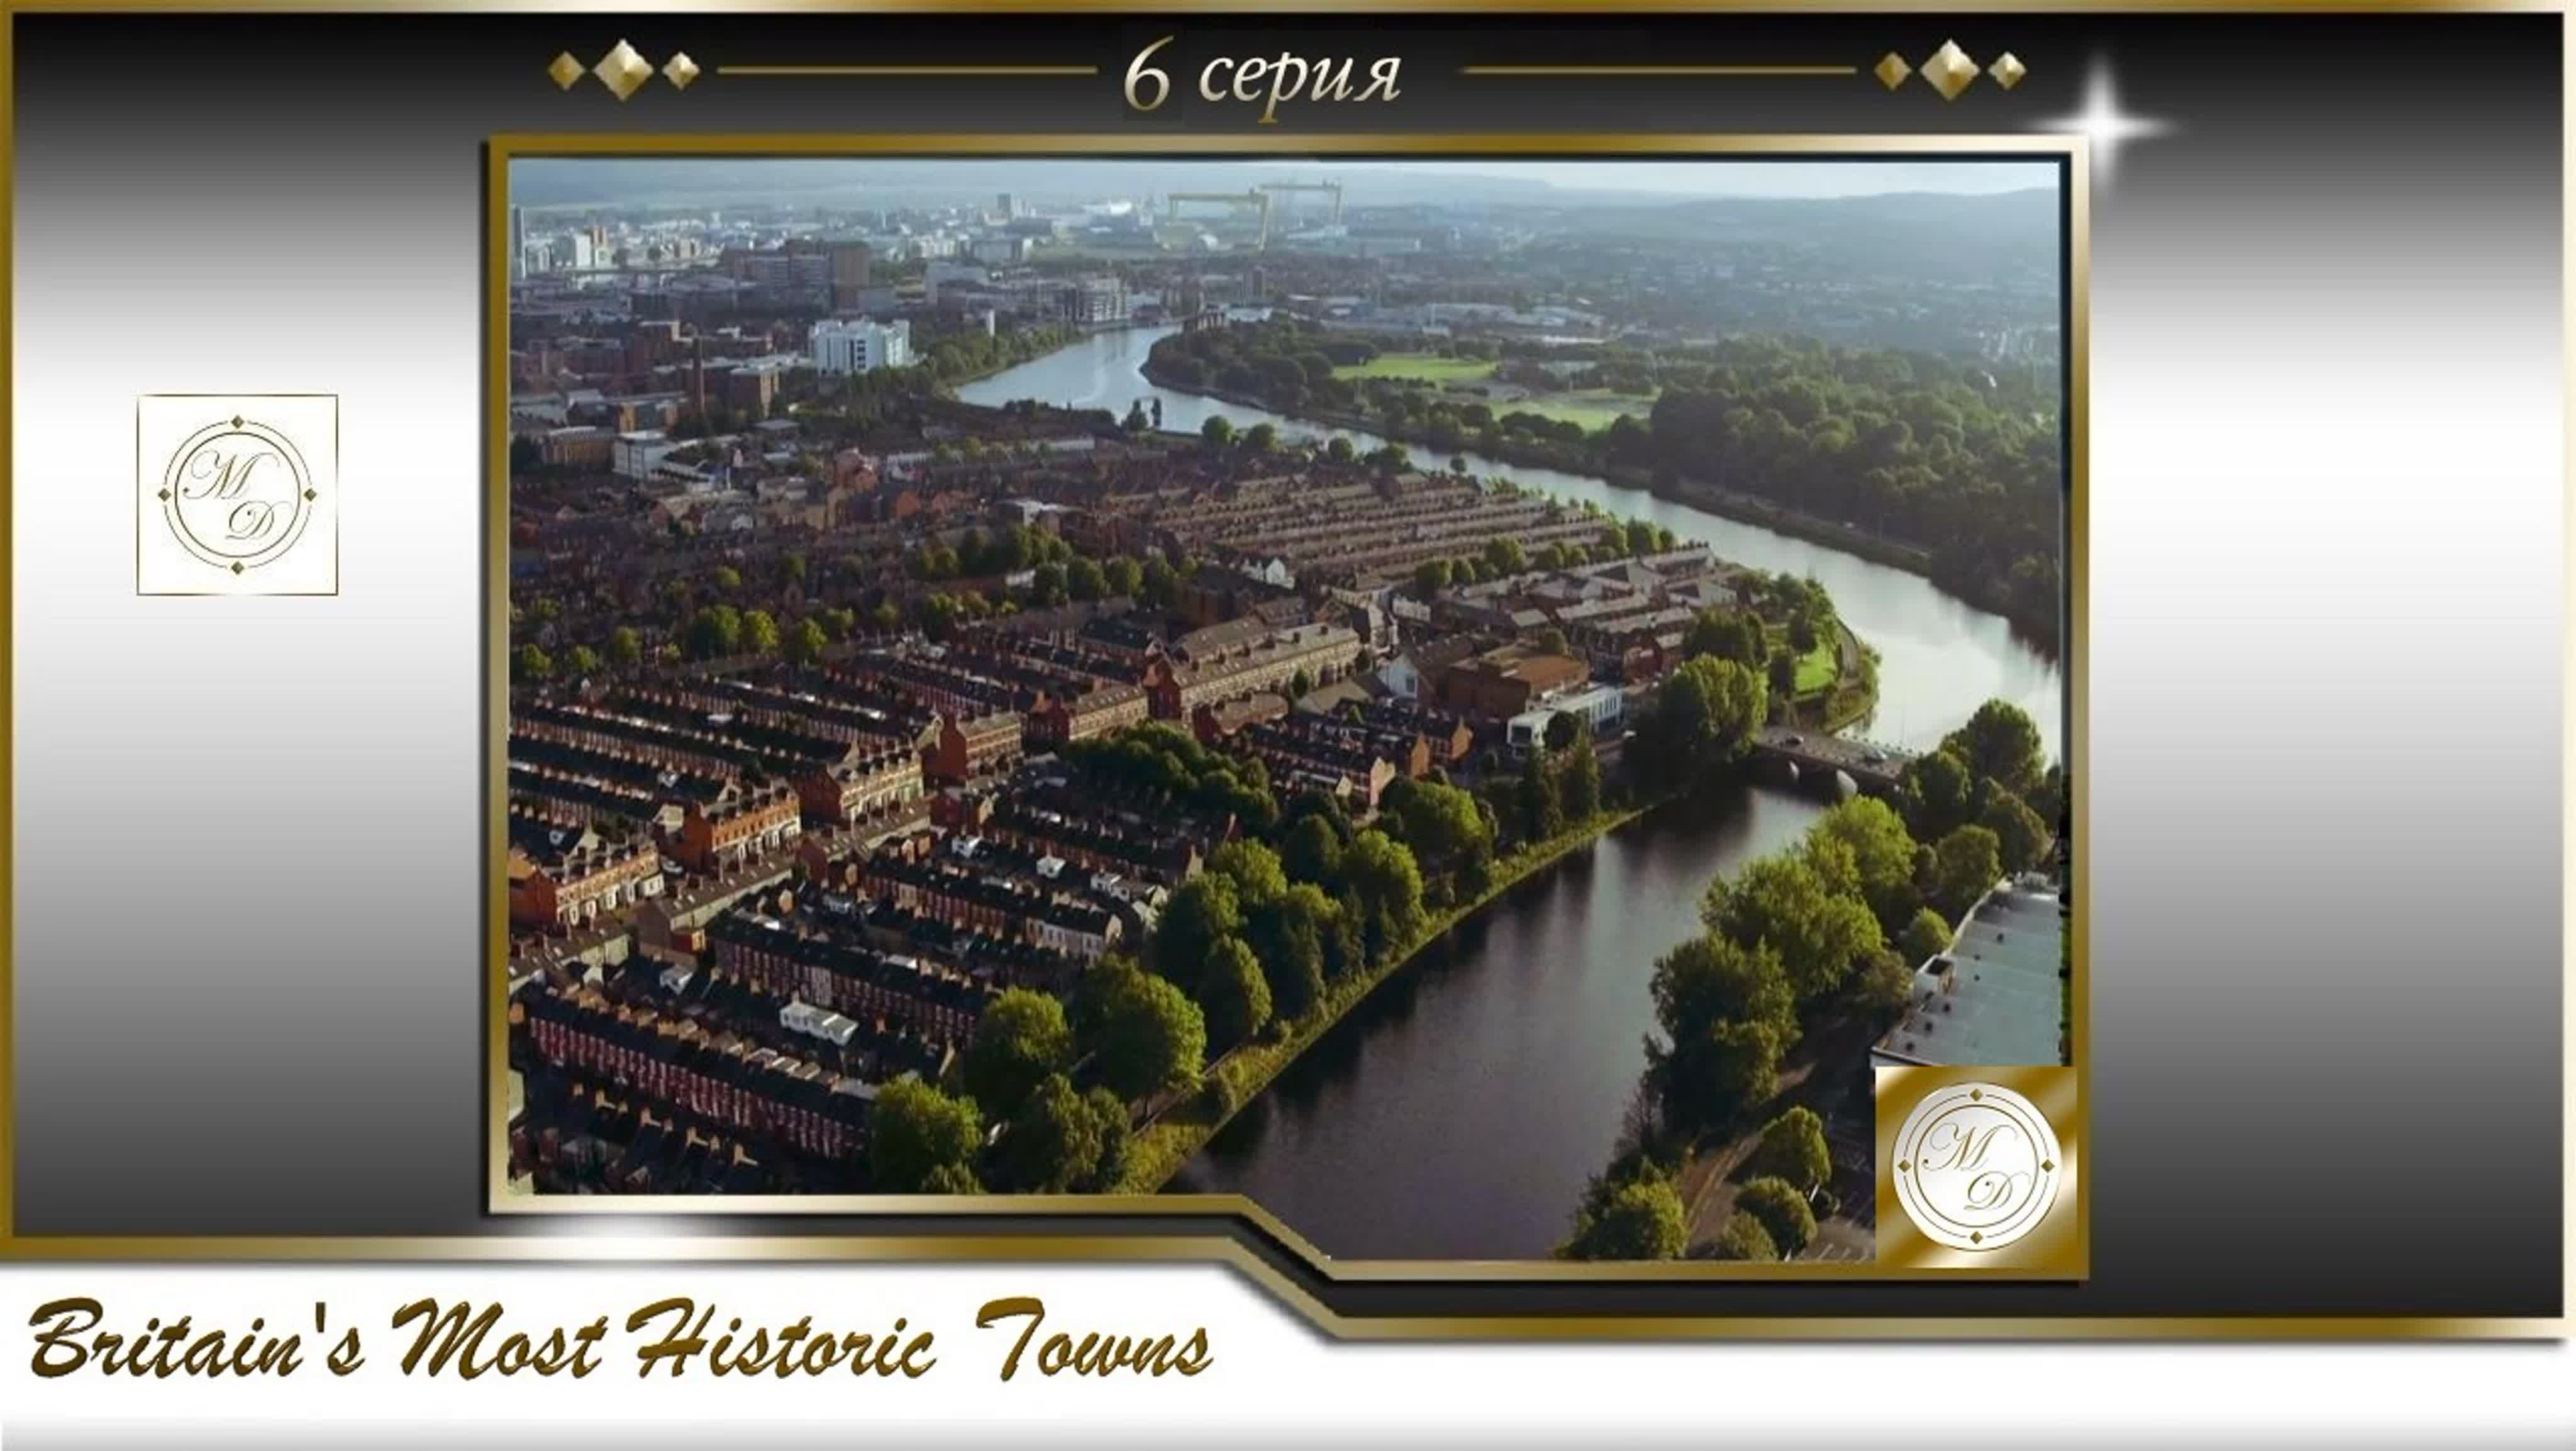 Britain's Most Historic Towns